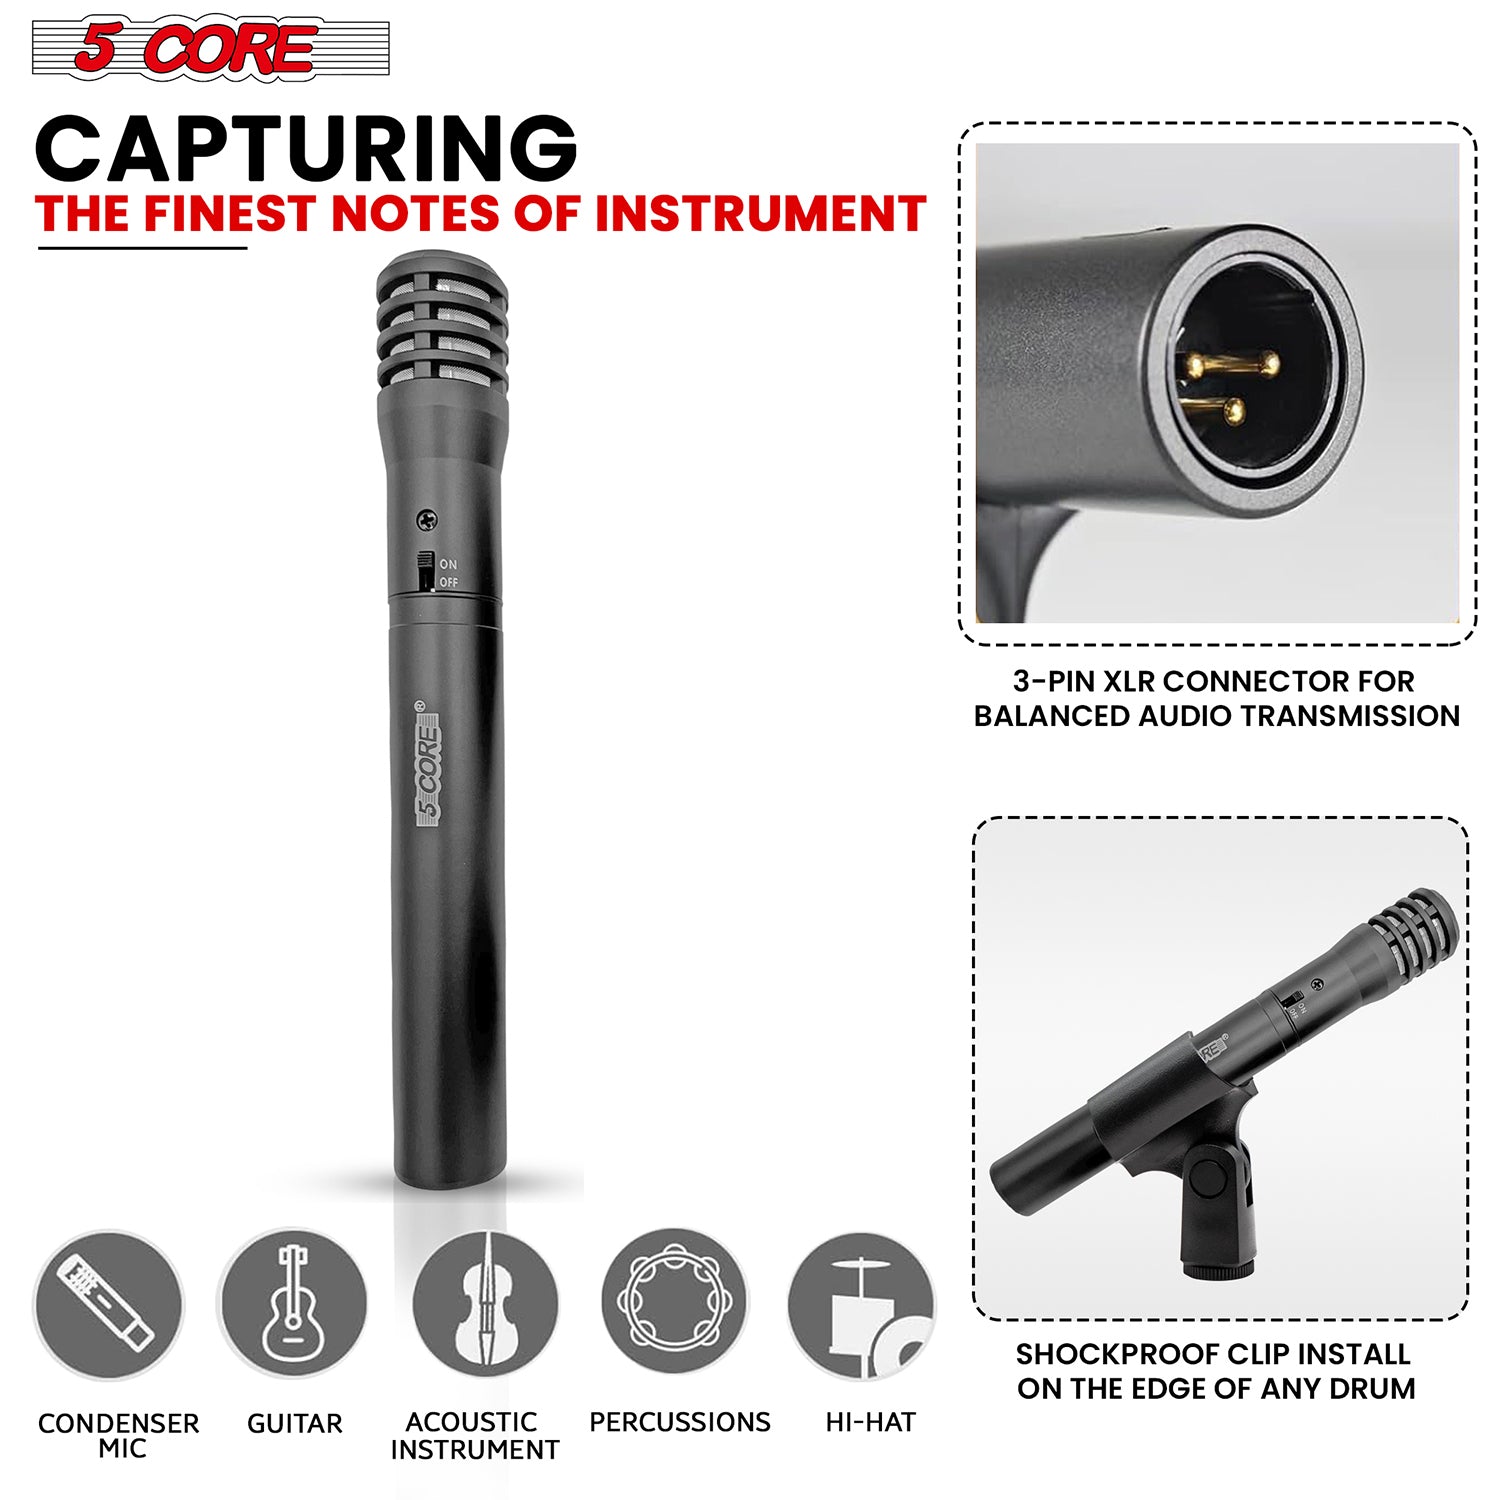 5 Core Instrument Microphone Cardioid Uni Directional Pickup for Live Performances and Recording